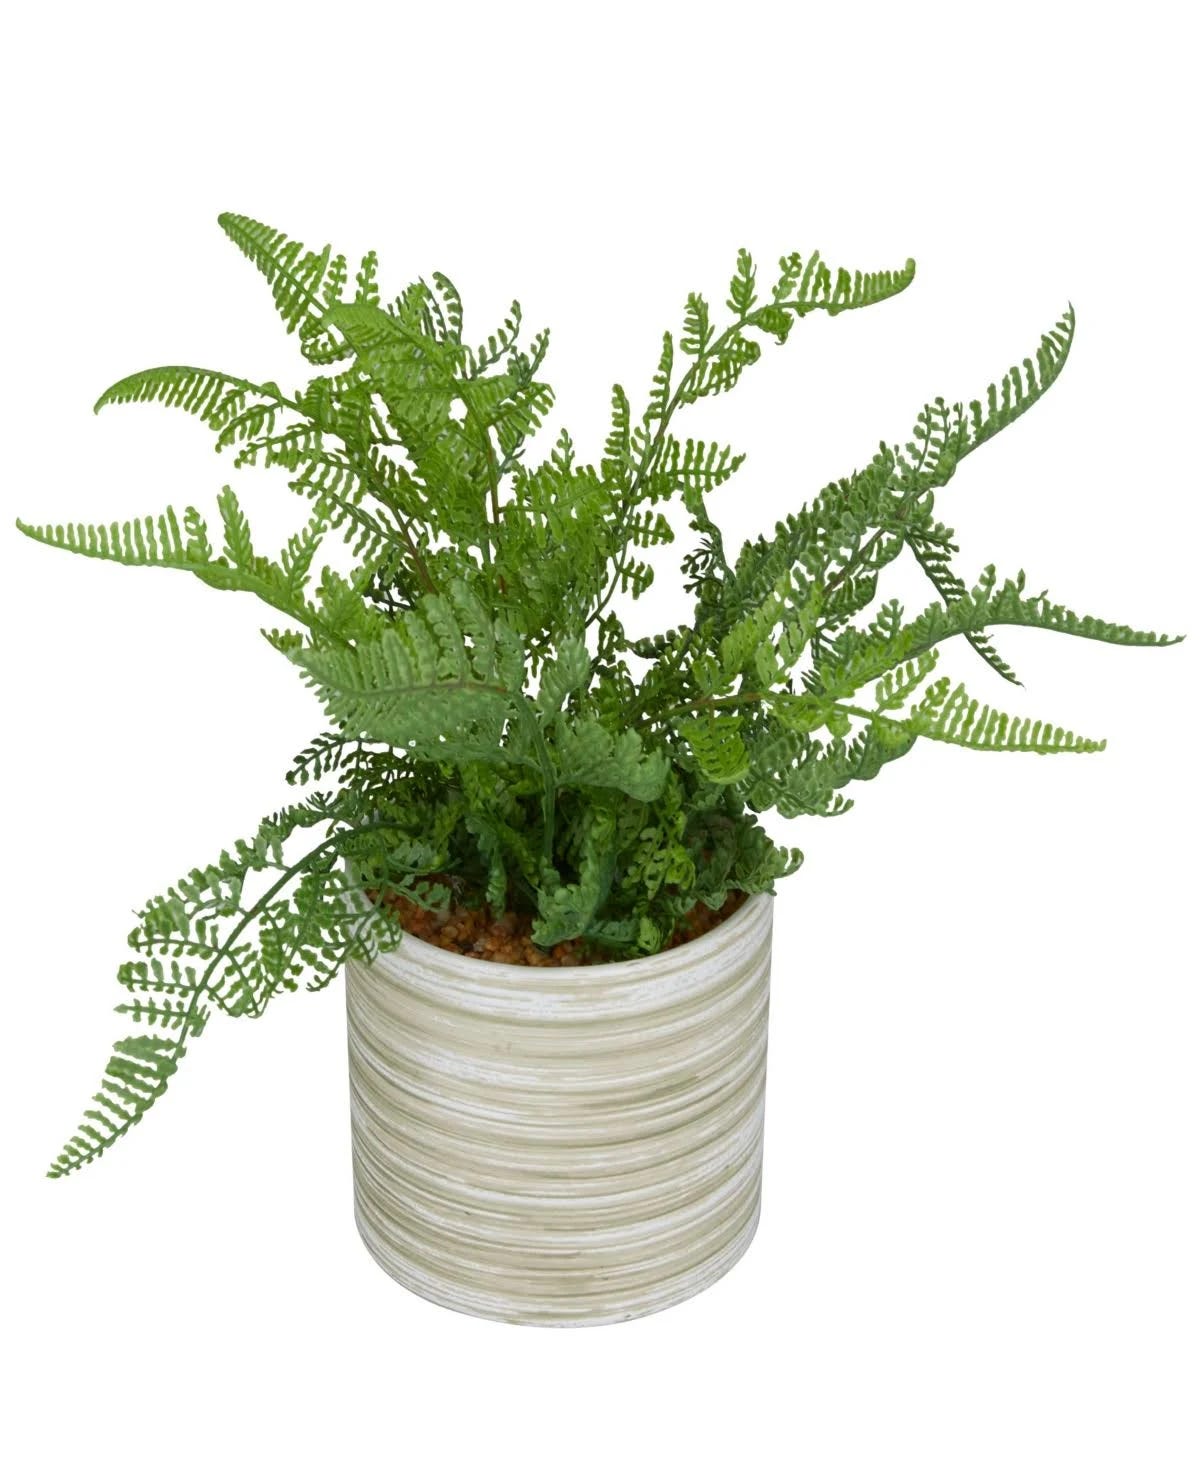 Realistic Artificial Fern for Decorative Touch | Image